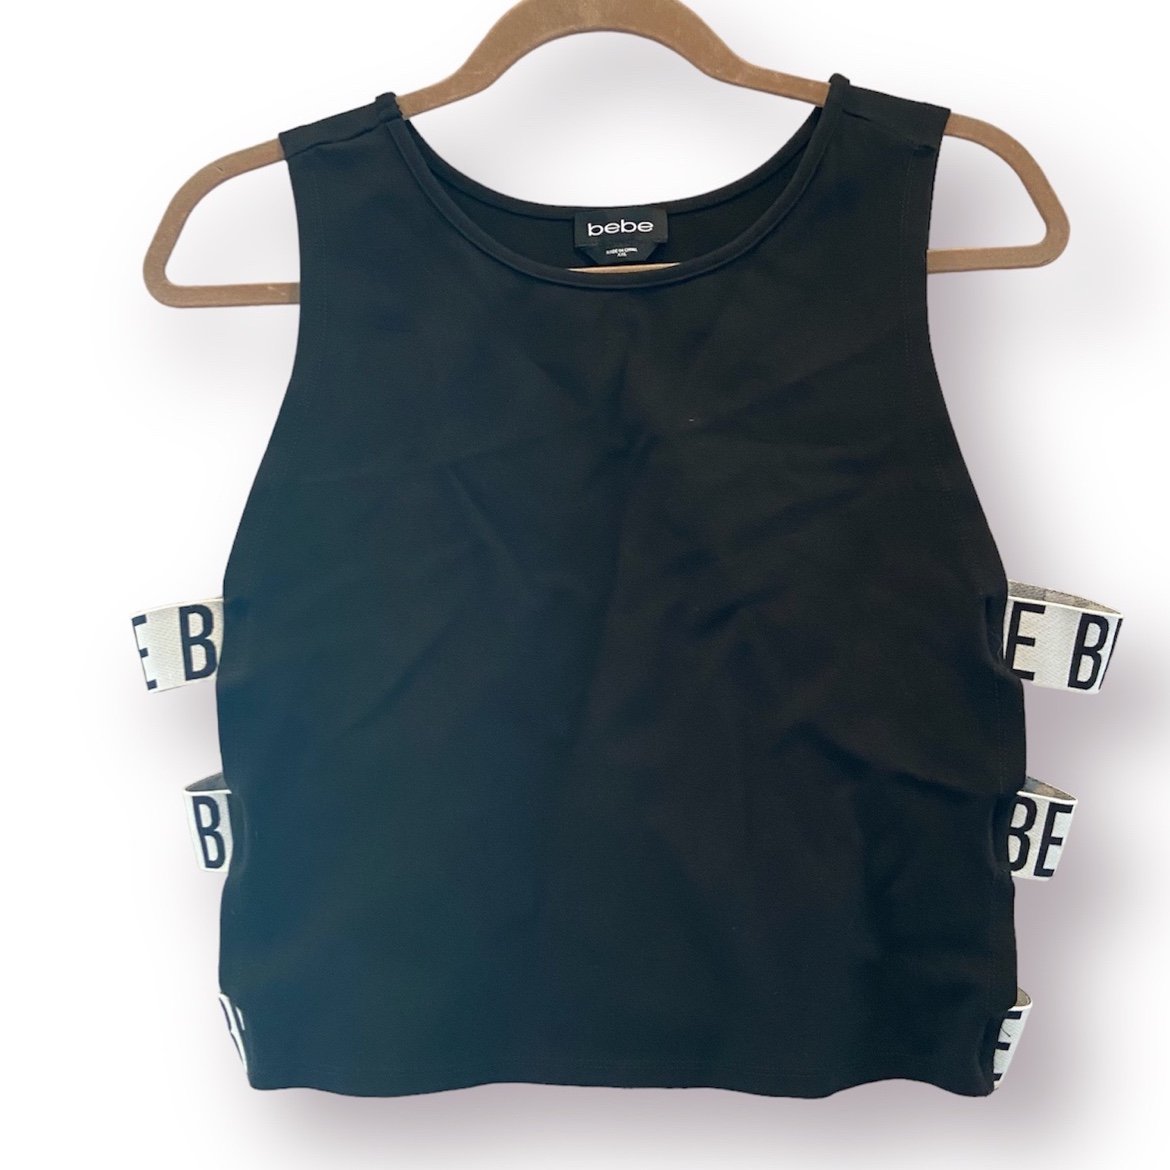 Exclusive BEBE Black Cutout Cropped Sleeveless Muscle T